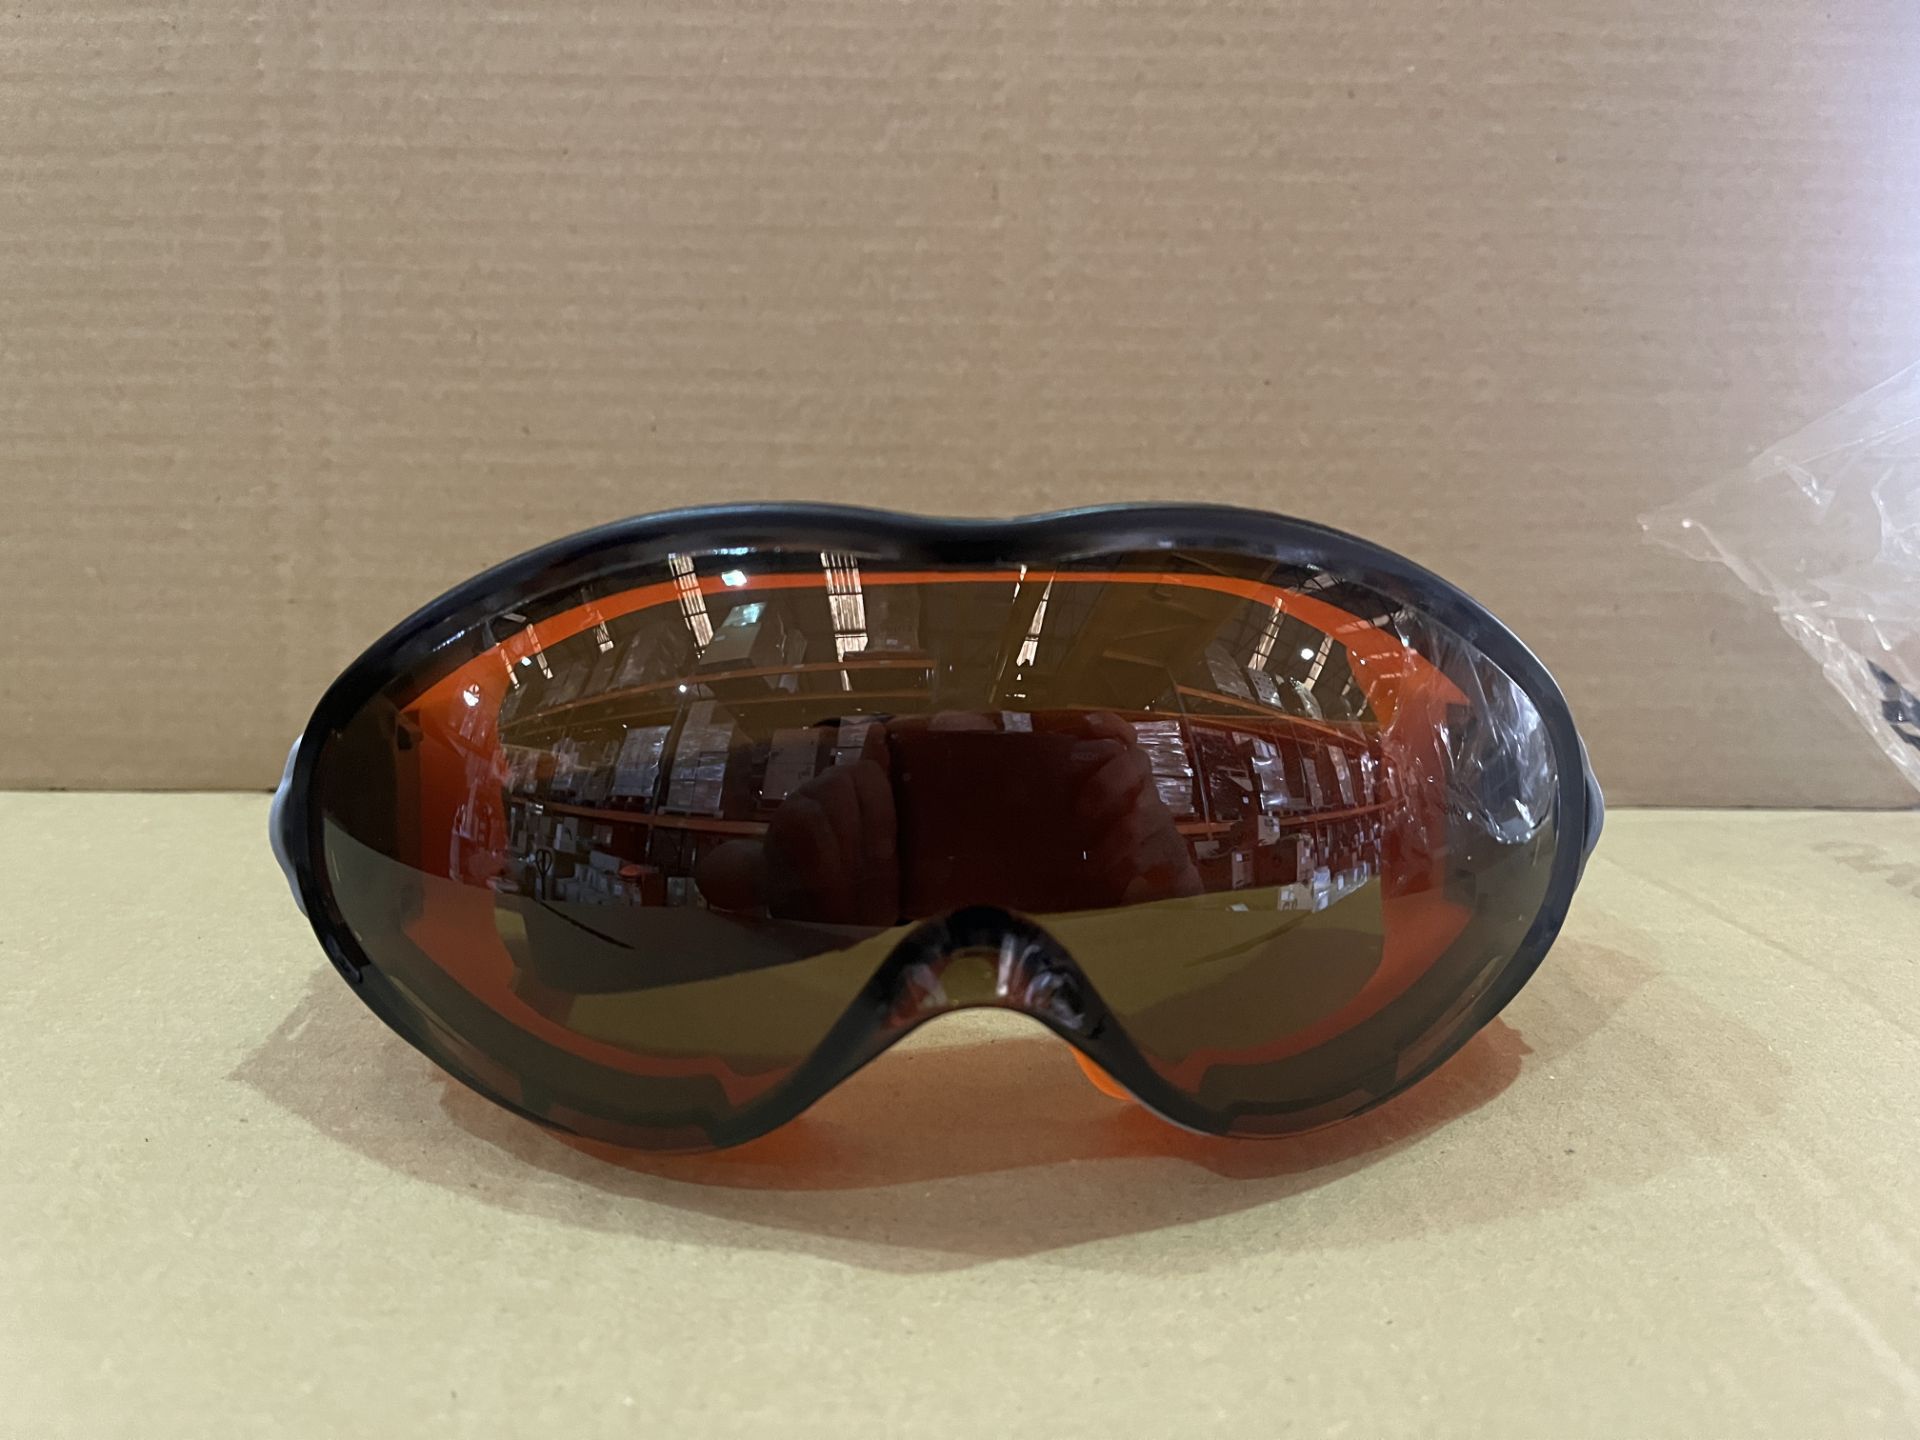 20 X BRAND NEW UVEX ULTRASONIC GOGGLES BROWN LENS RRP £15 EACH R15